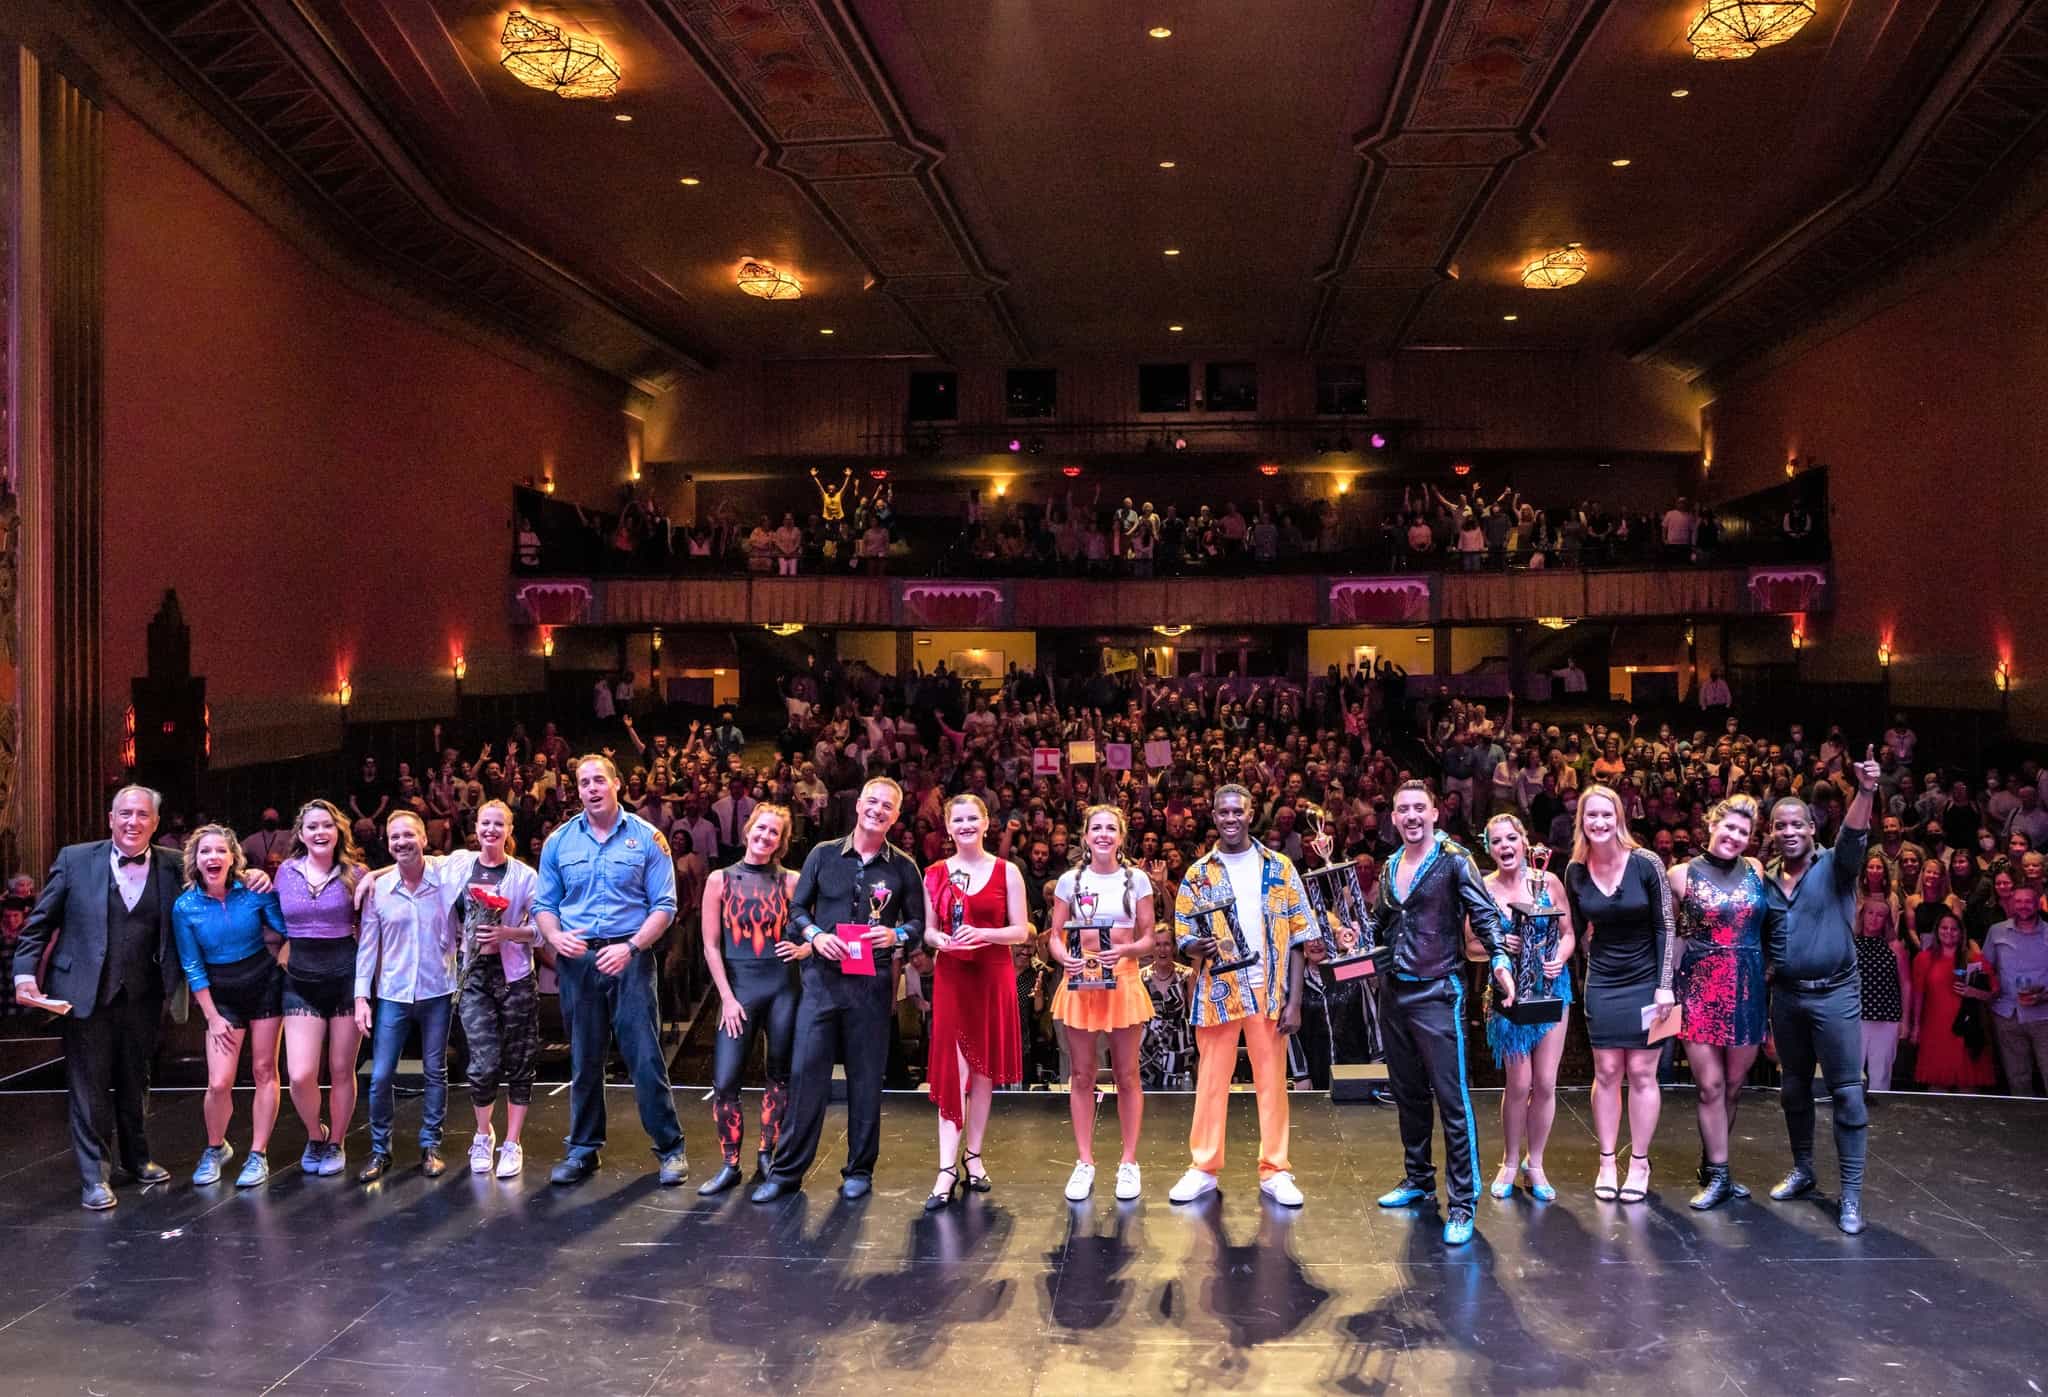 Dancing with the Burlington Stars Full ensemble and crowd